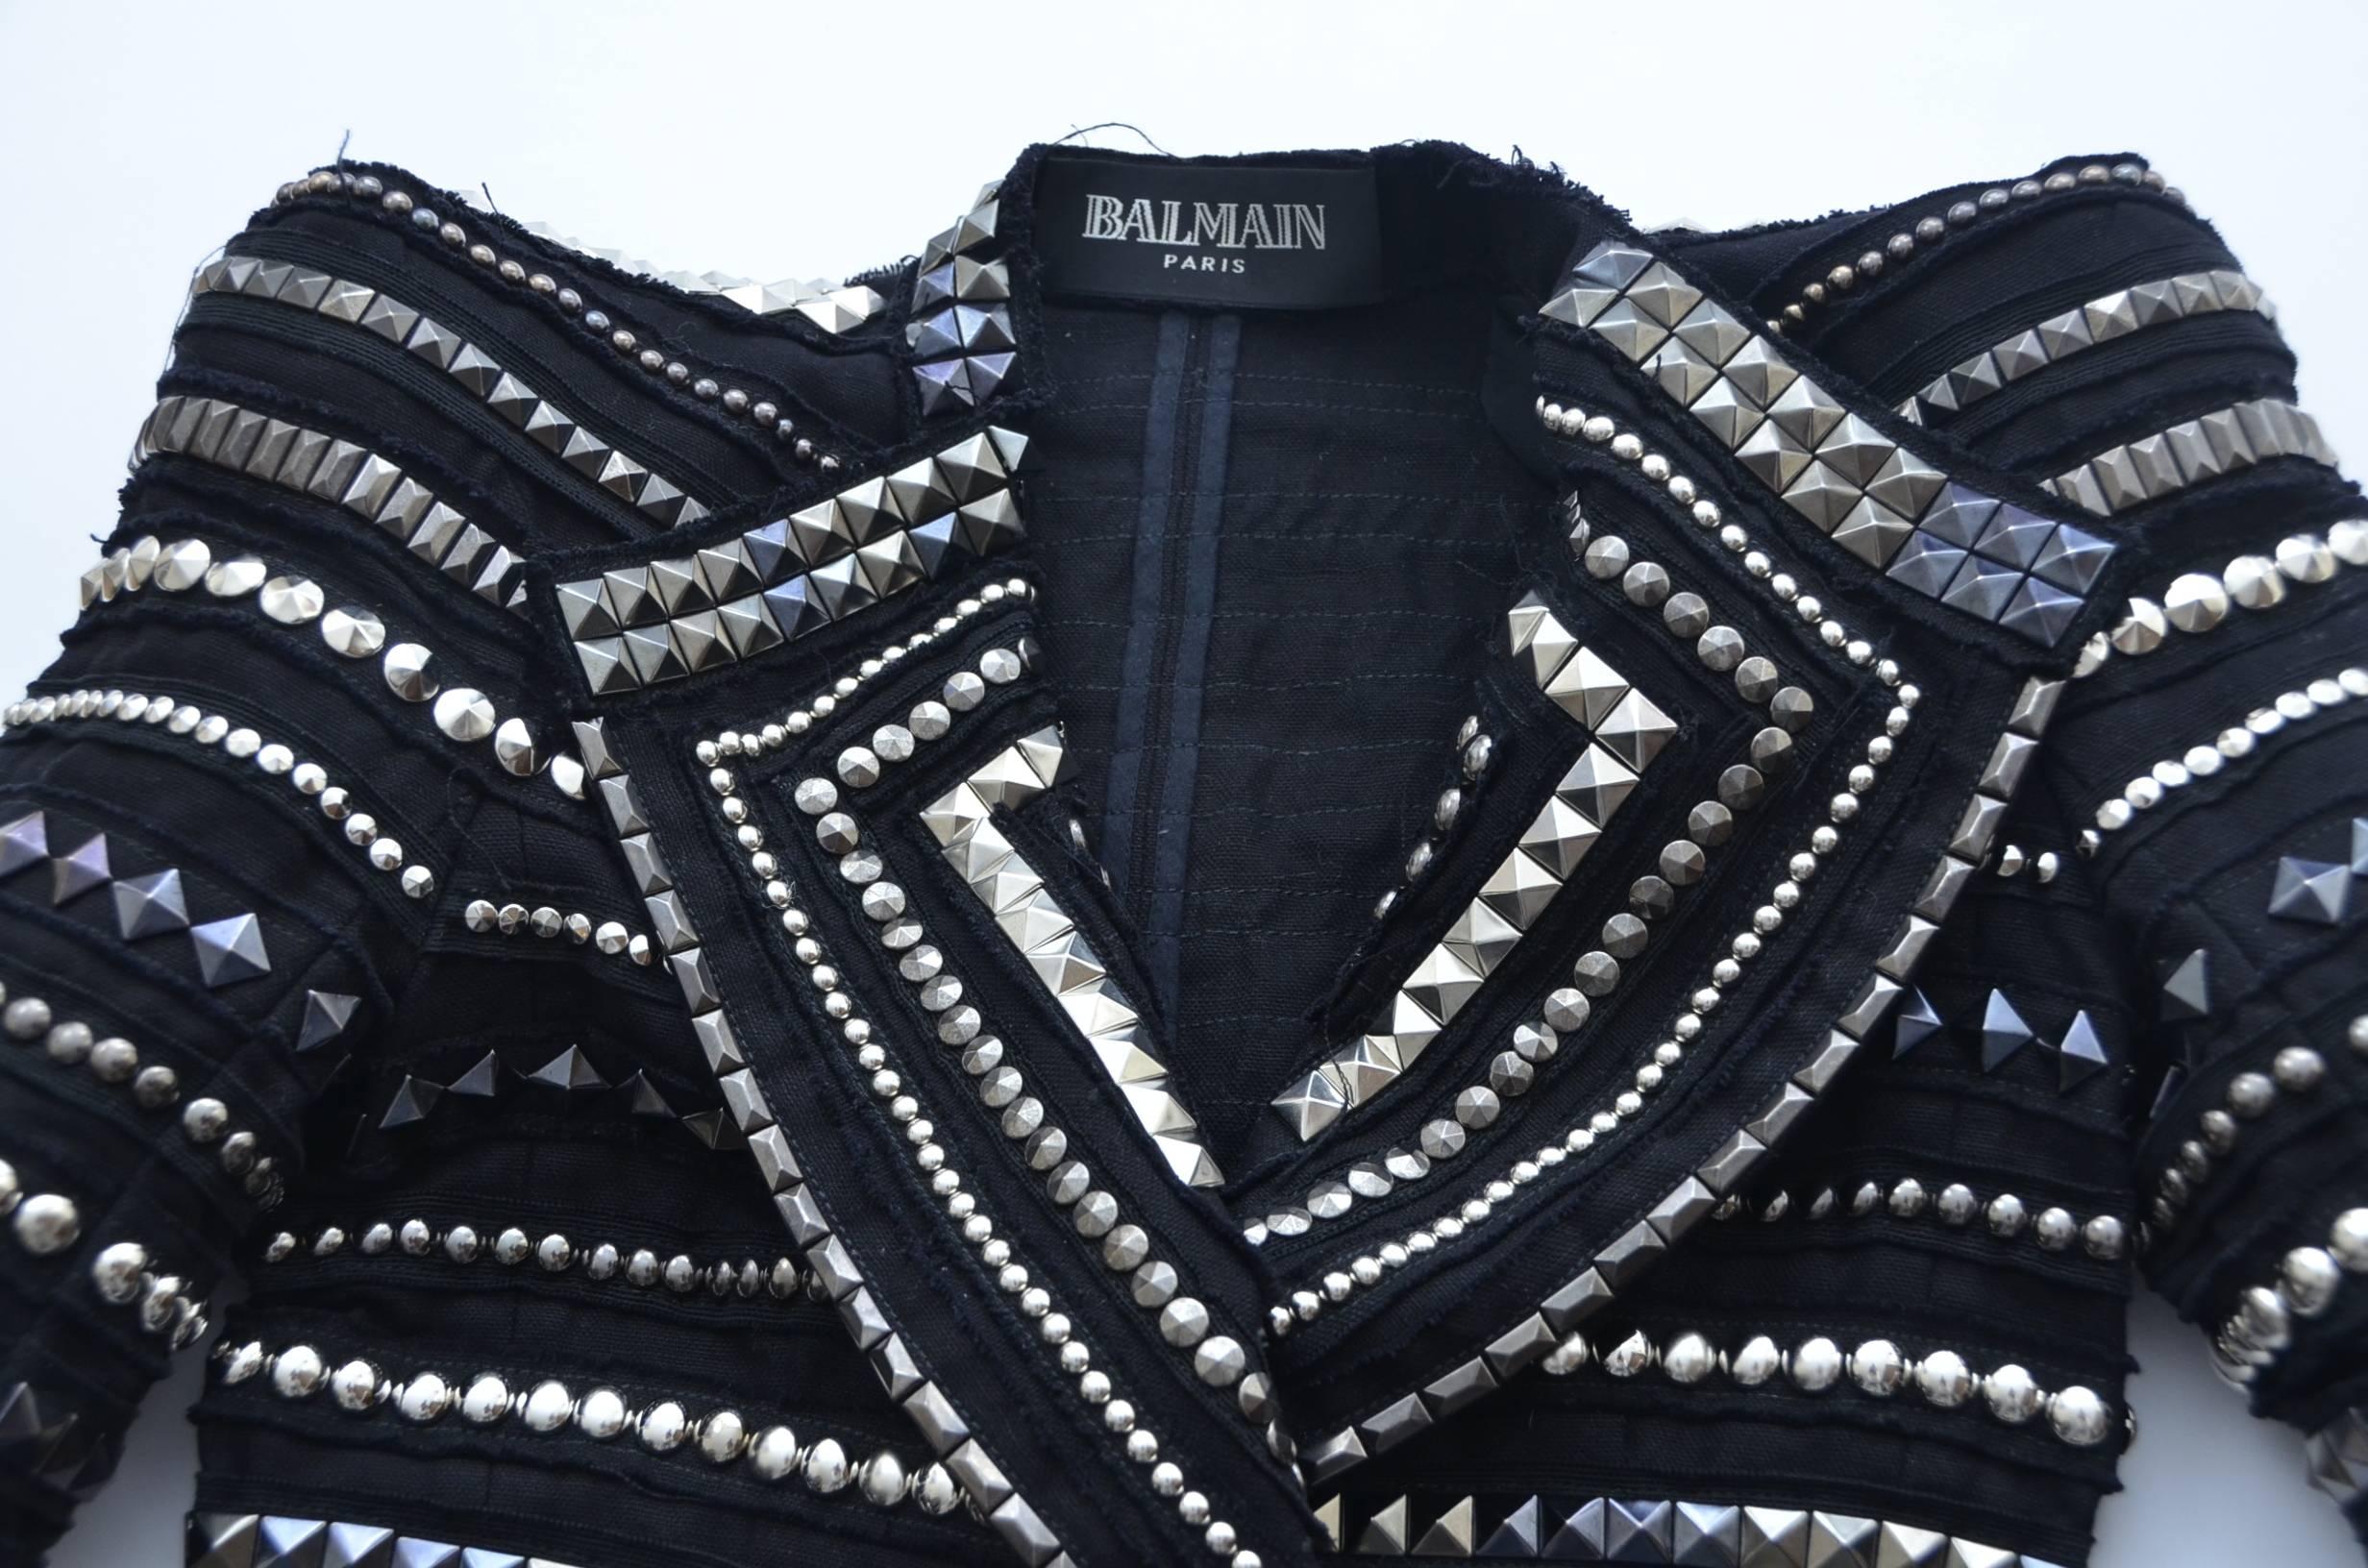 Black BALMAIN Jacket '09 Runway  Seen And Owned  By  Pop Icon  Michael Jackson 